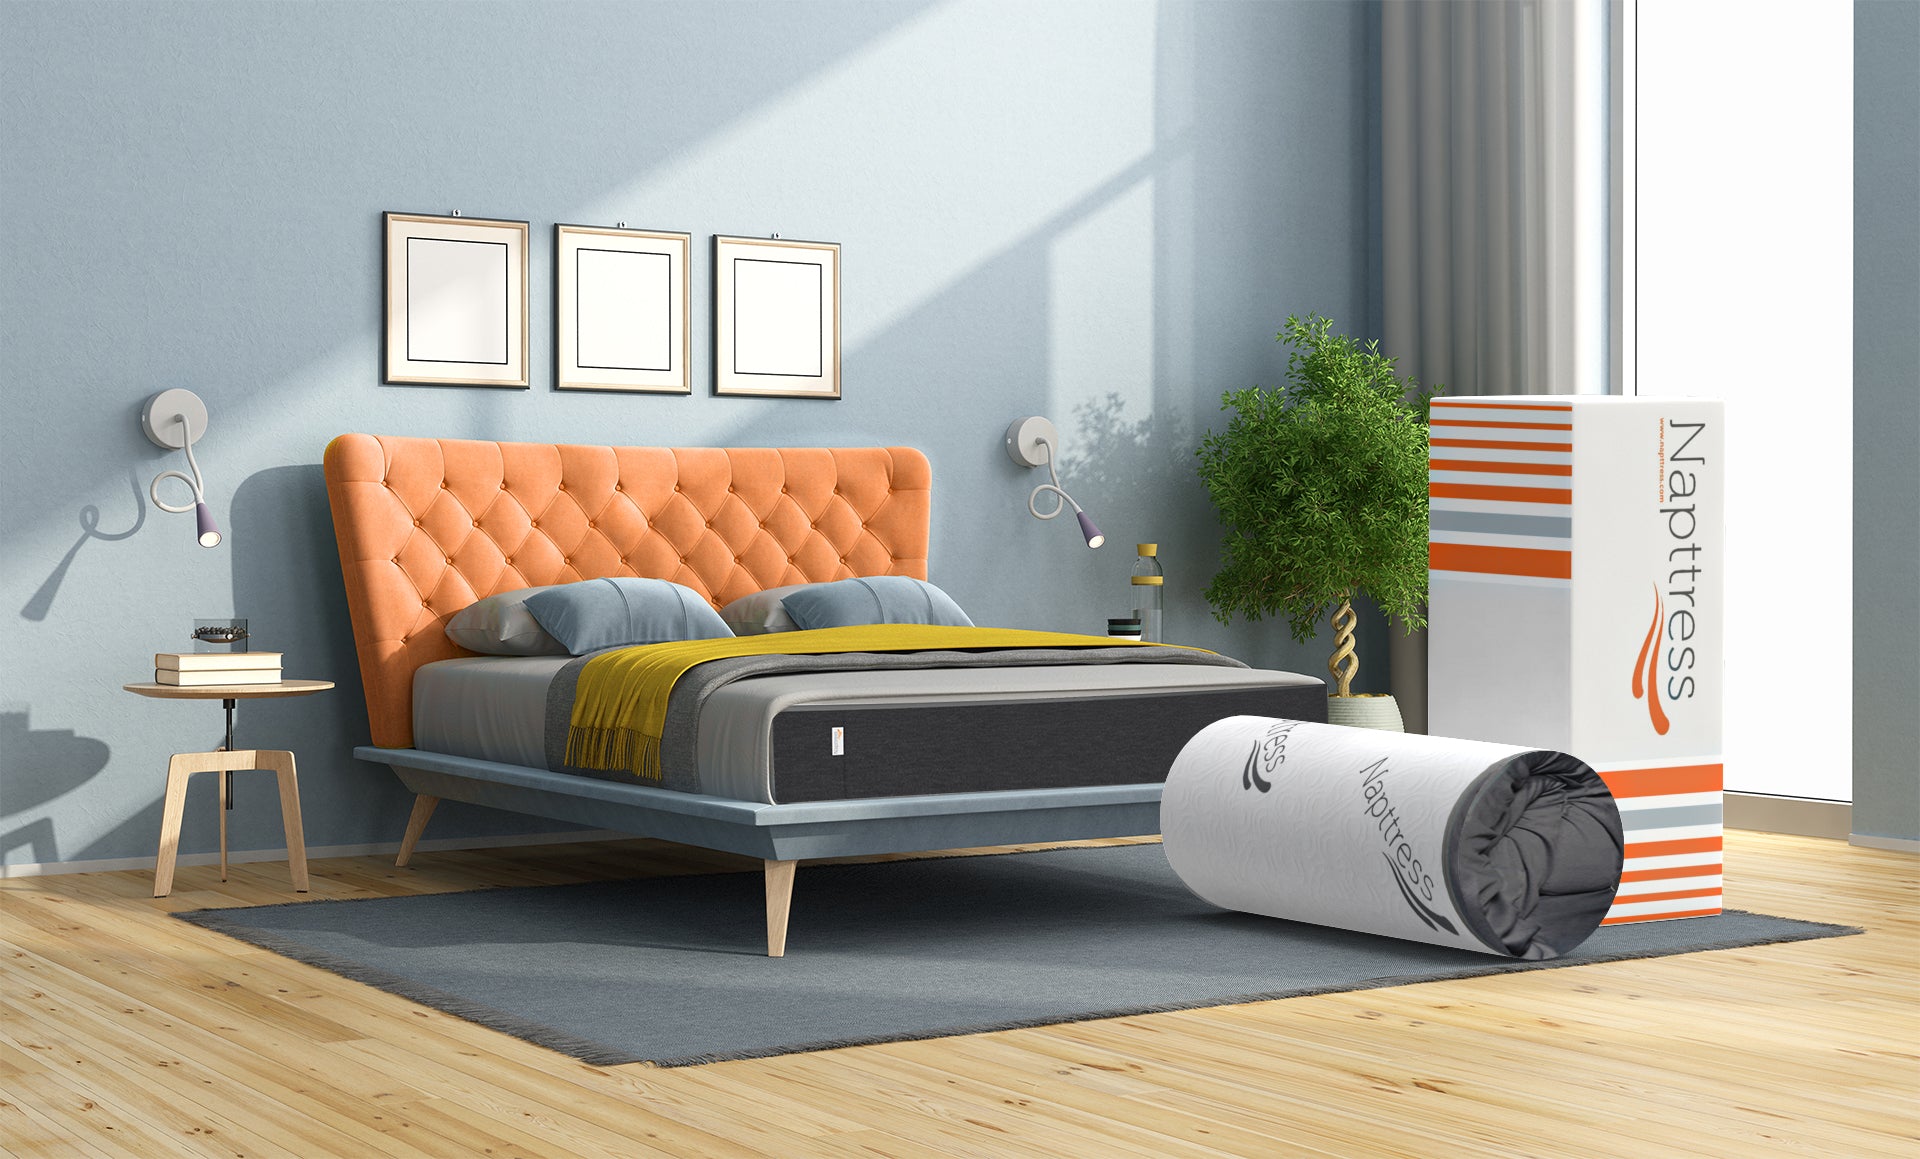 Napttress - The Perfect Mattress for Everyone